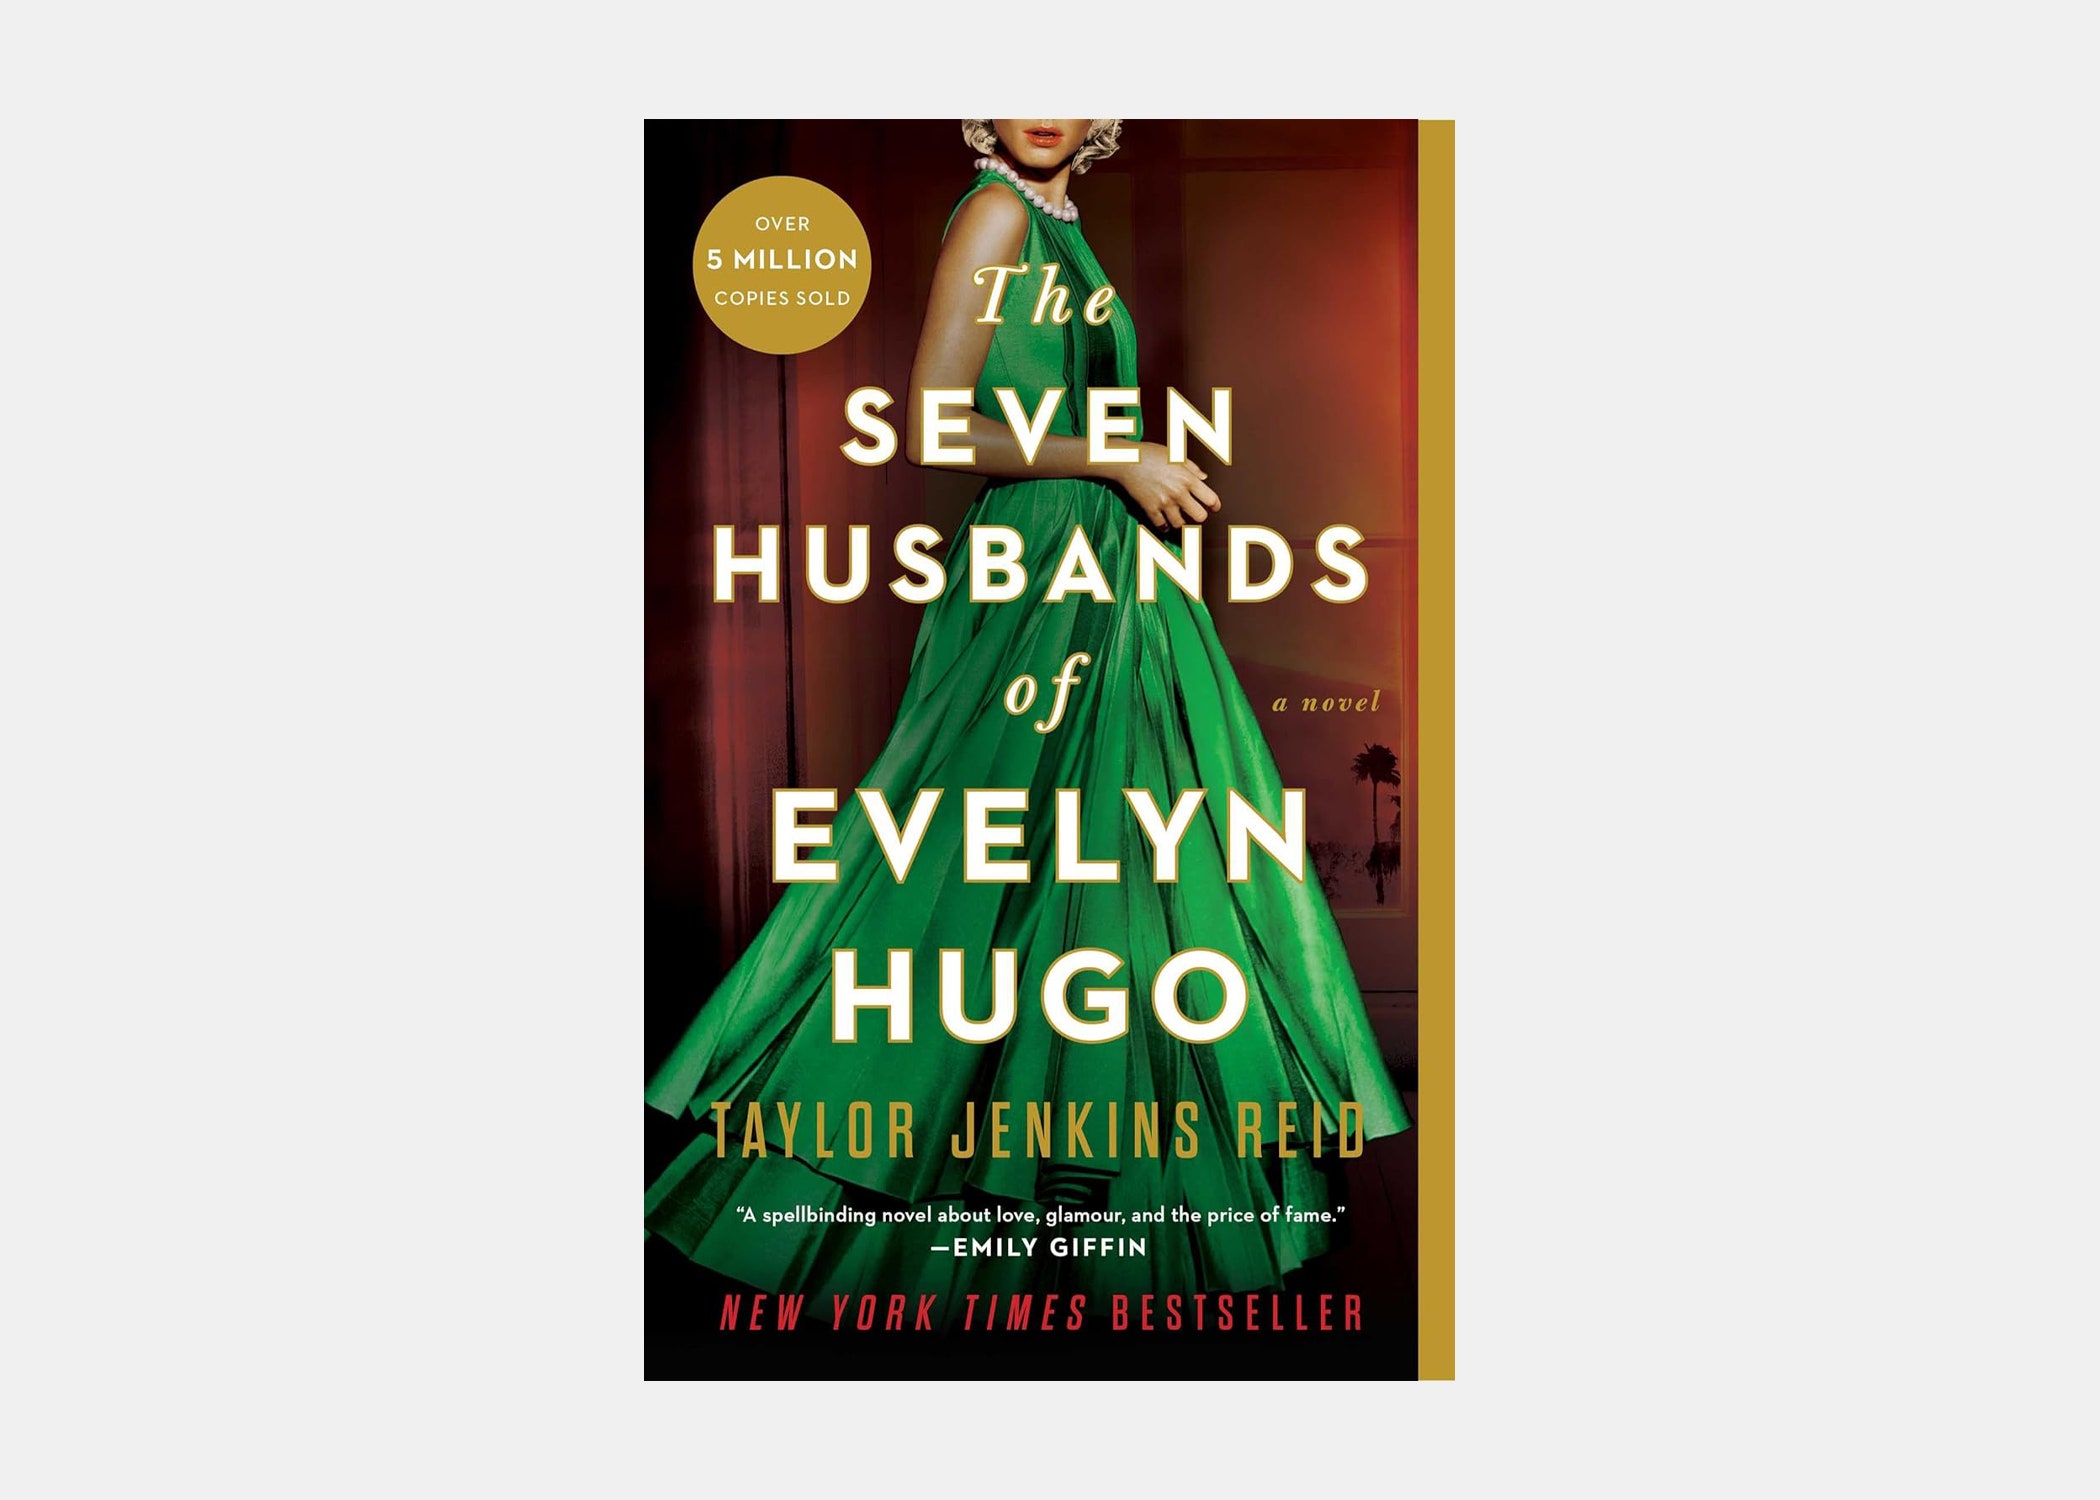 <p>Another phenomenal read from Taylor Jenkins Reed, this book explains the complex life of Hollywood star Evelyn Hugo, who was married to seven husbands, and her journey to true love. It was gripping until the very last page and is filled with several twists you cannot see coming.</p> <p><strong>Page count:</strong> 391</p> <p><strong>Average read time:</strong> 6 hours and 13 minutes</p> $10, Amazon. <a href="https://www.amazon.com/Seven-Husbands-Evelyn-Hugo-Novel/dp/1501161938/ref=sr_1_1">Get it now!</a><p>Sign up to receive the latest news, expert tips, and inspiration on all things travel</p><a href="https://www.cntraveler.com/newsletter/the-daily?sourceCode=msnsend">Inspire Me</a>